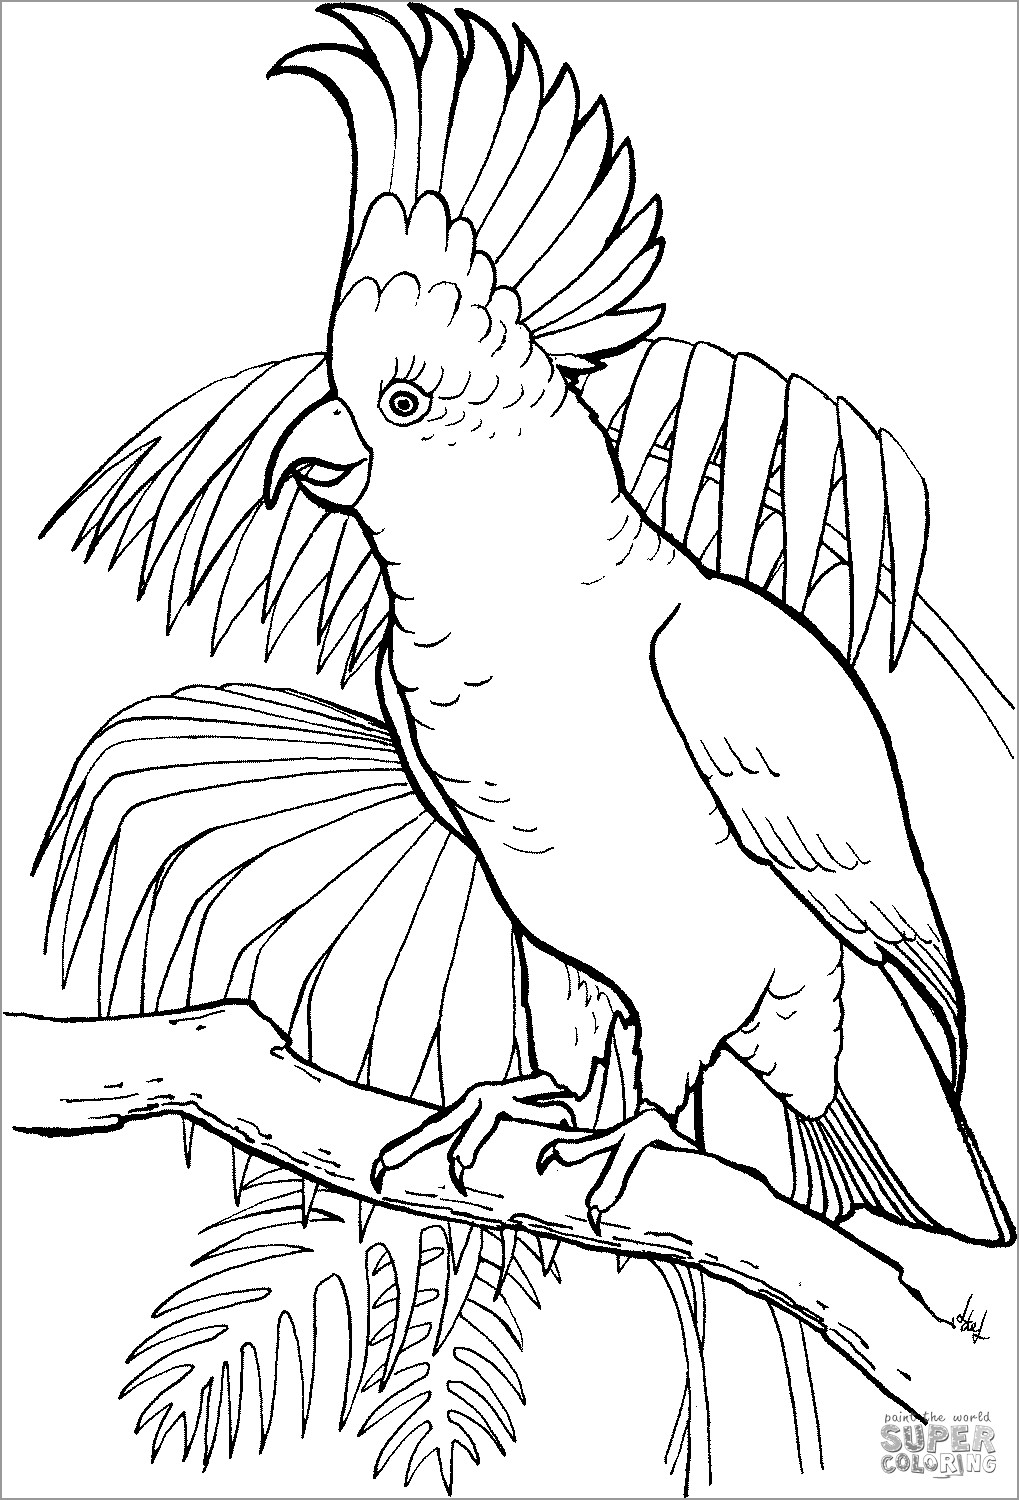 Sulfur Crested Cockatoo Coloring Page